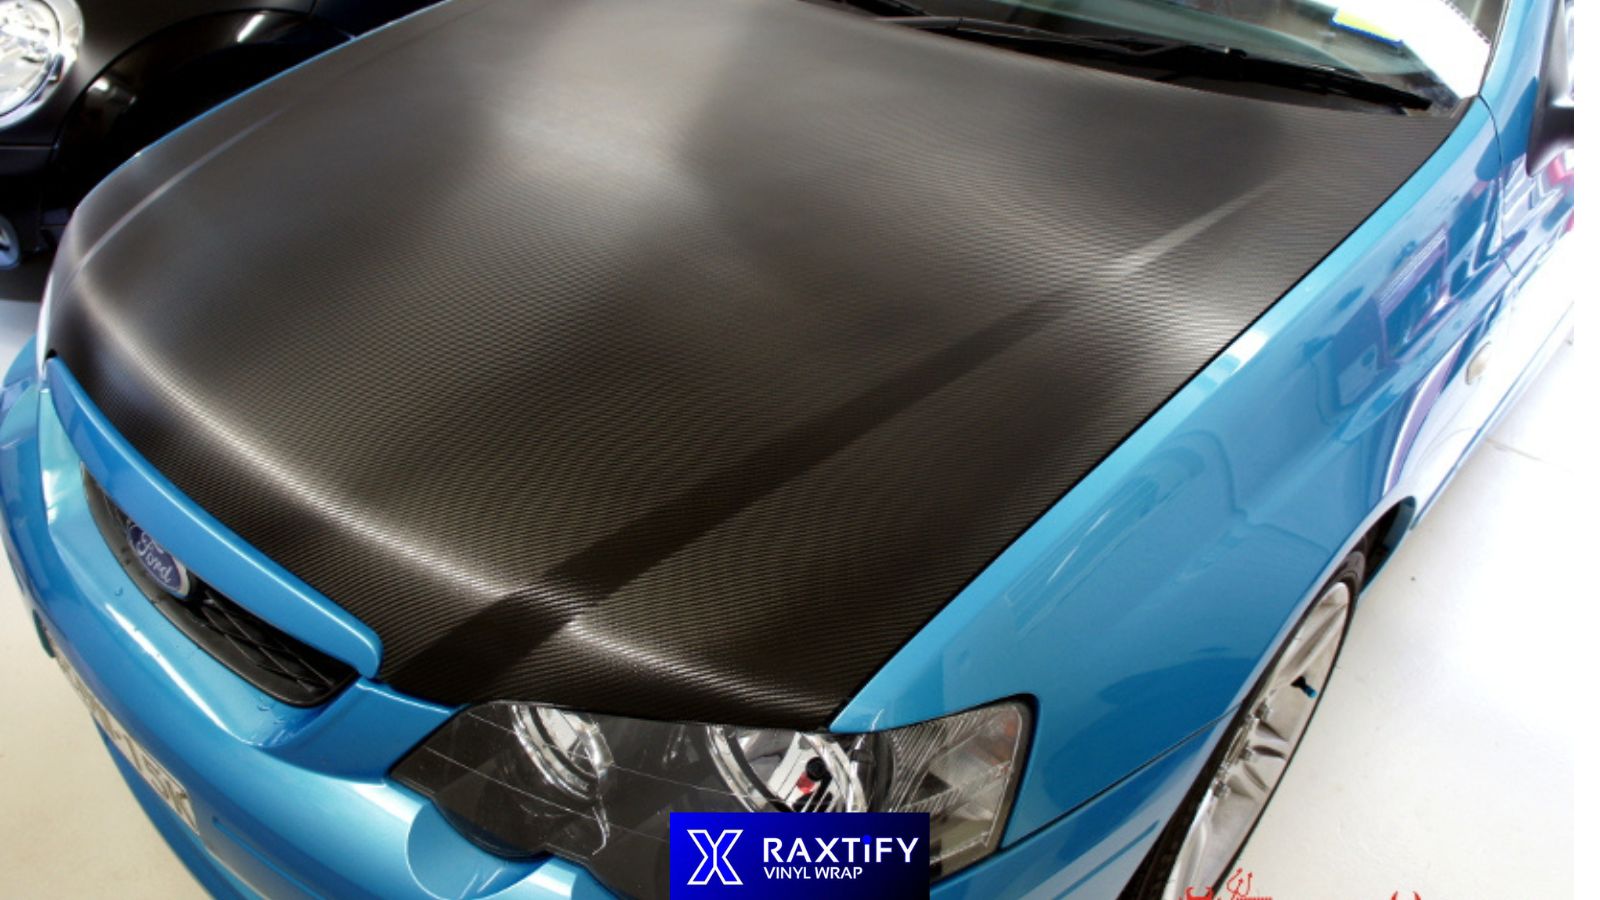 Why do drivers choose to wrap their hoods in carbon fiber films?